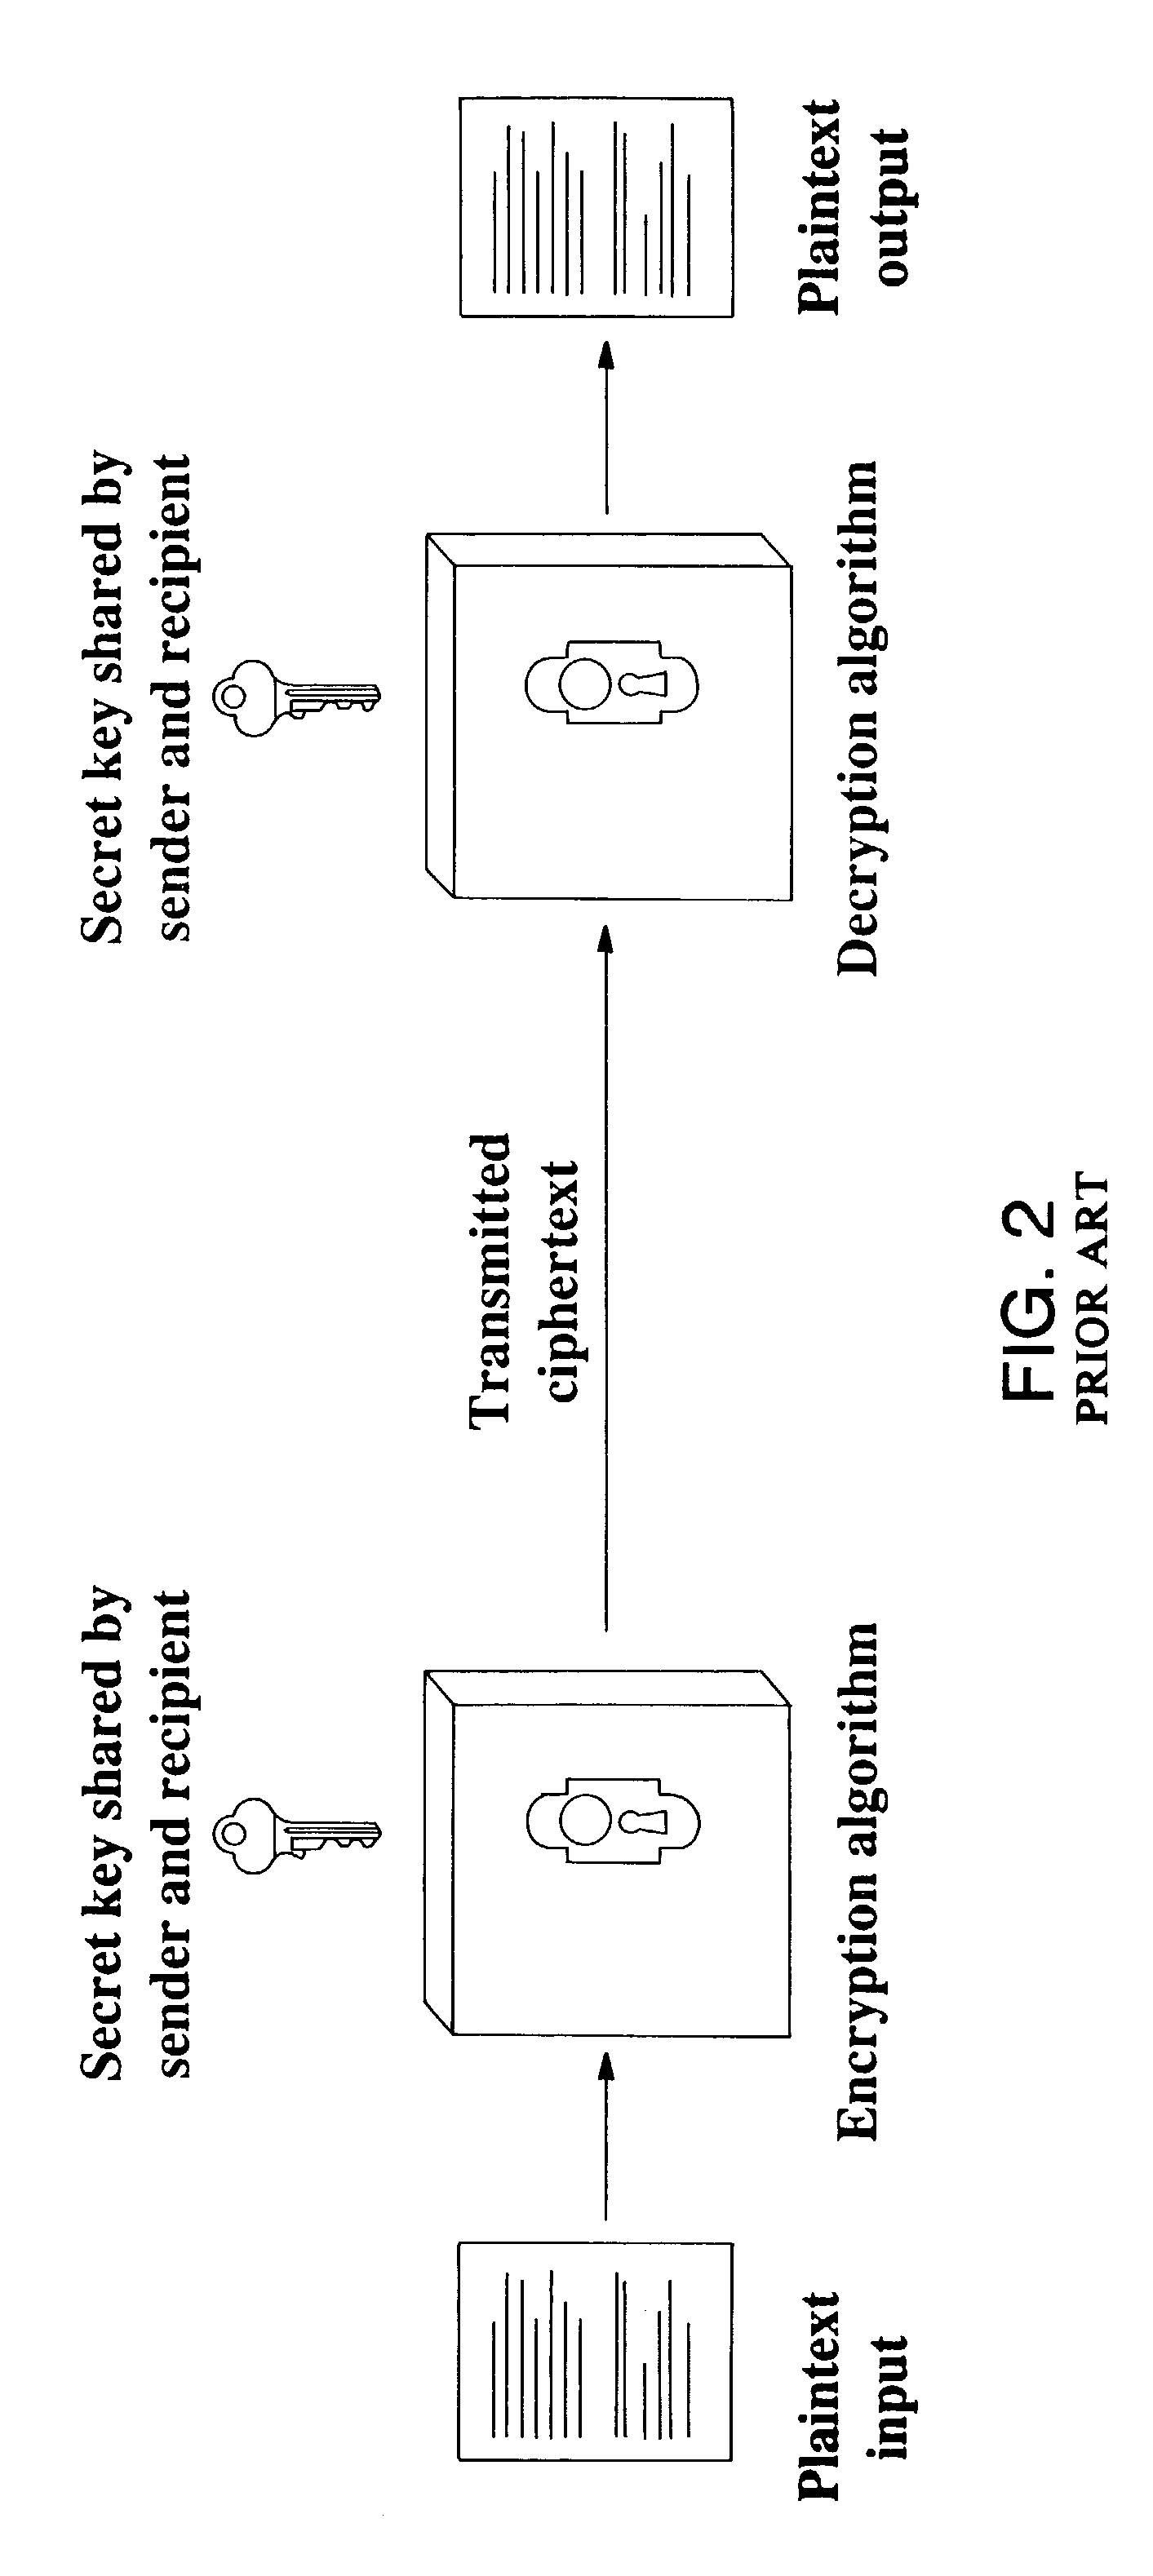 Method and system for passively analyzing communication data based on frequency analysis of encrypted data traffic, and method and system for deterring passive analysis of communication data